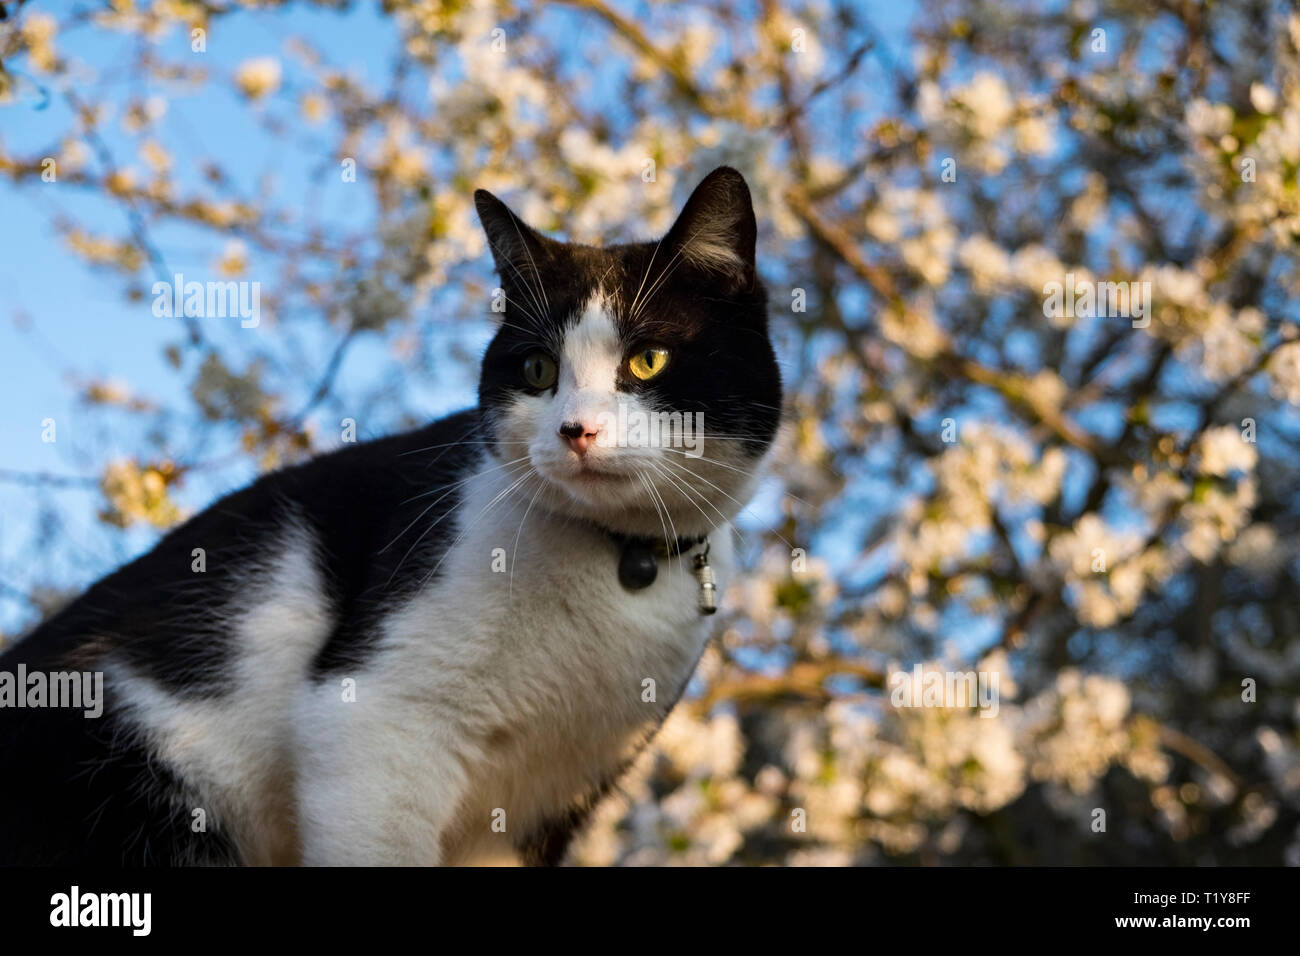 London, UK, 29th March 2019. Roly the cat basks in the sunshine at the dawn of an unseasonally warm day in the capital, with temperatures expected to reach 17 degrees. (c) Paul Swinney/Alamy Live News Stock Photo